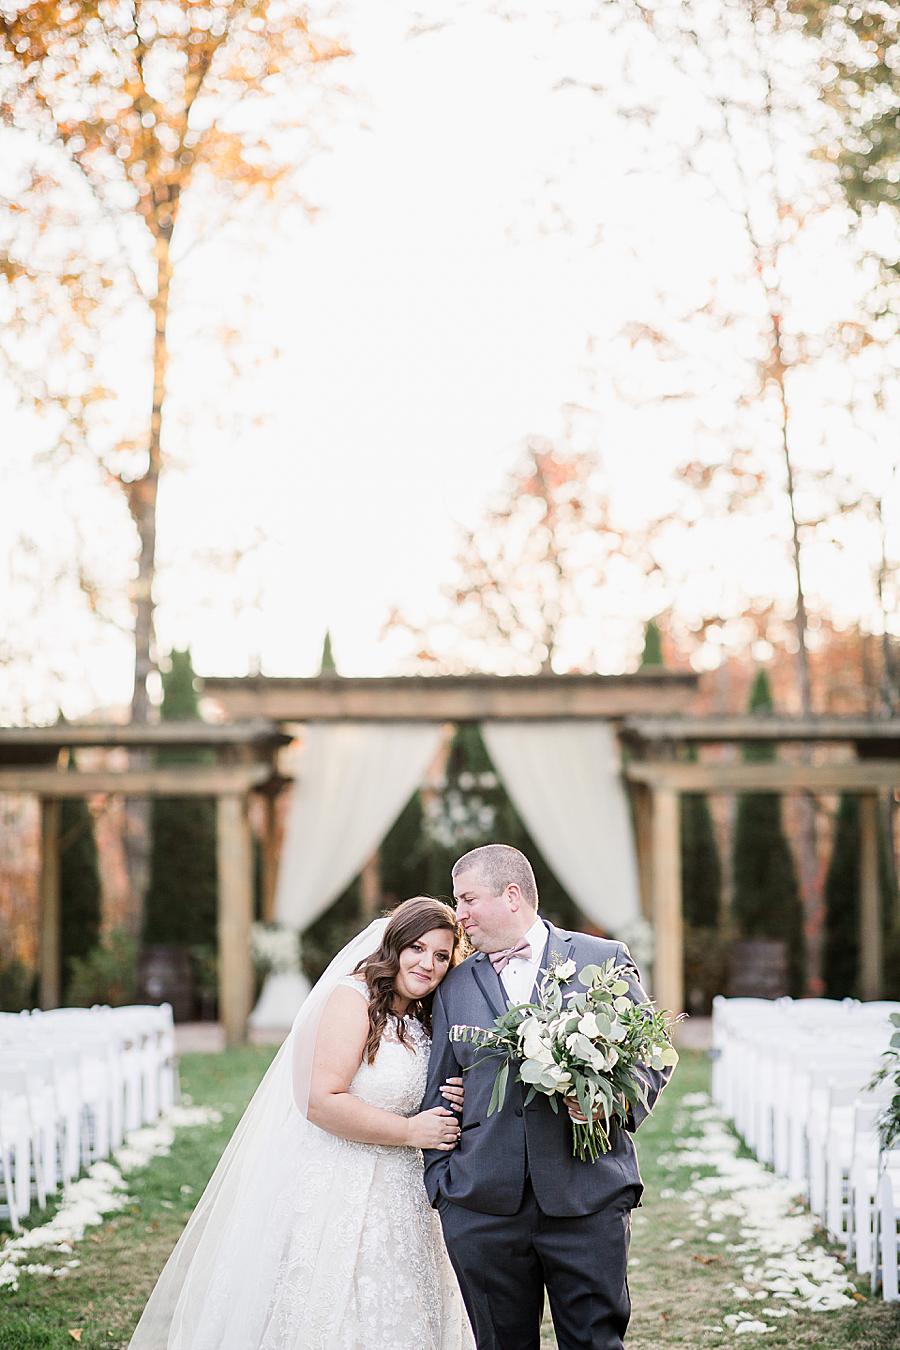 Kiss on the forehead at this Wedding at Castleton Farms by Knoxville Wedding Photographer, Amanda May Photos.